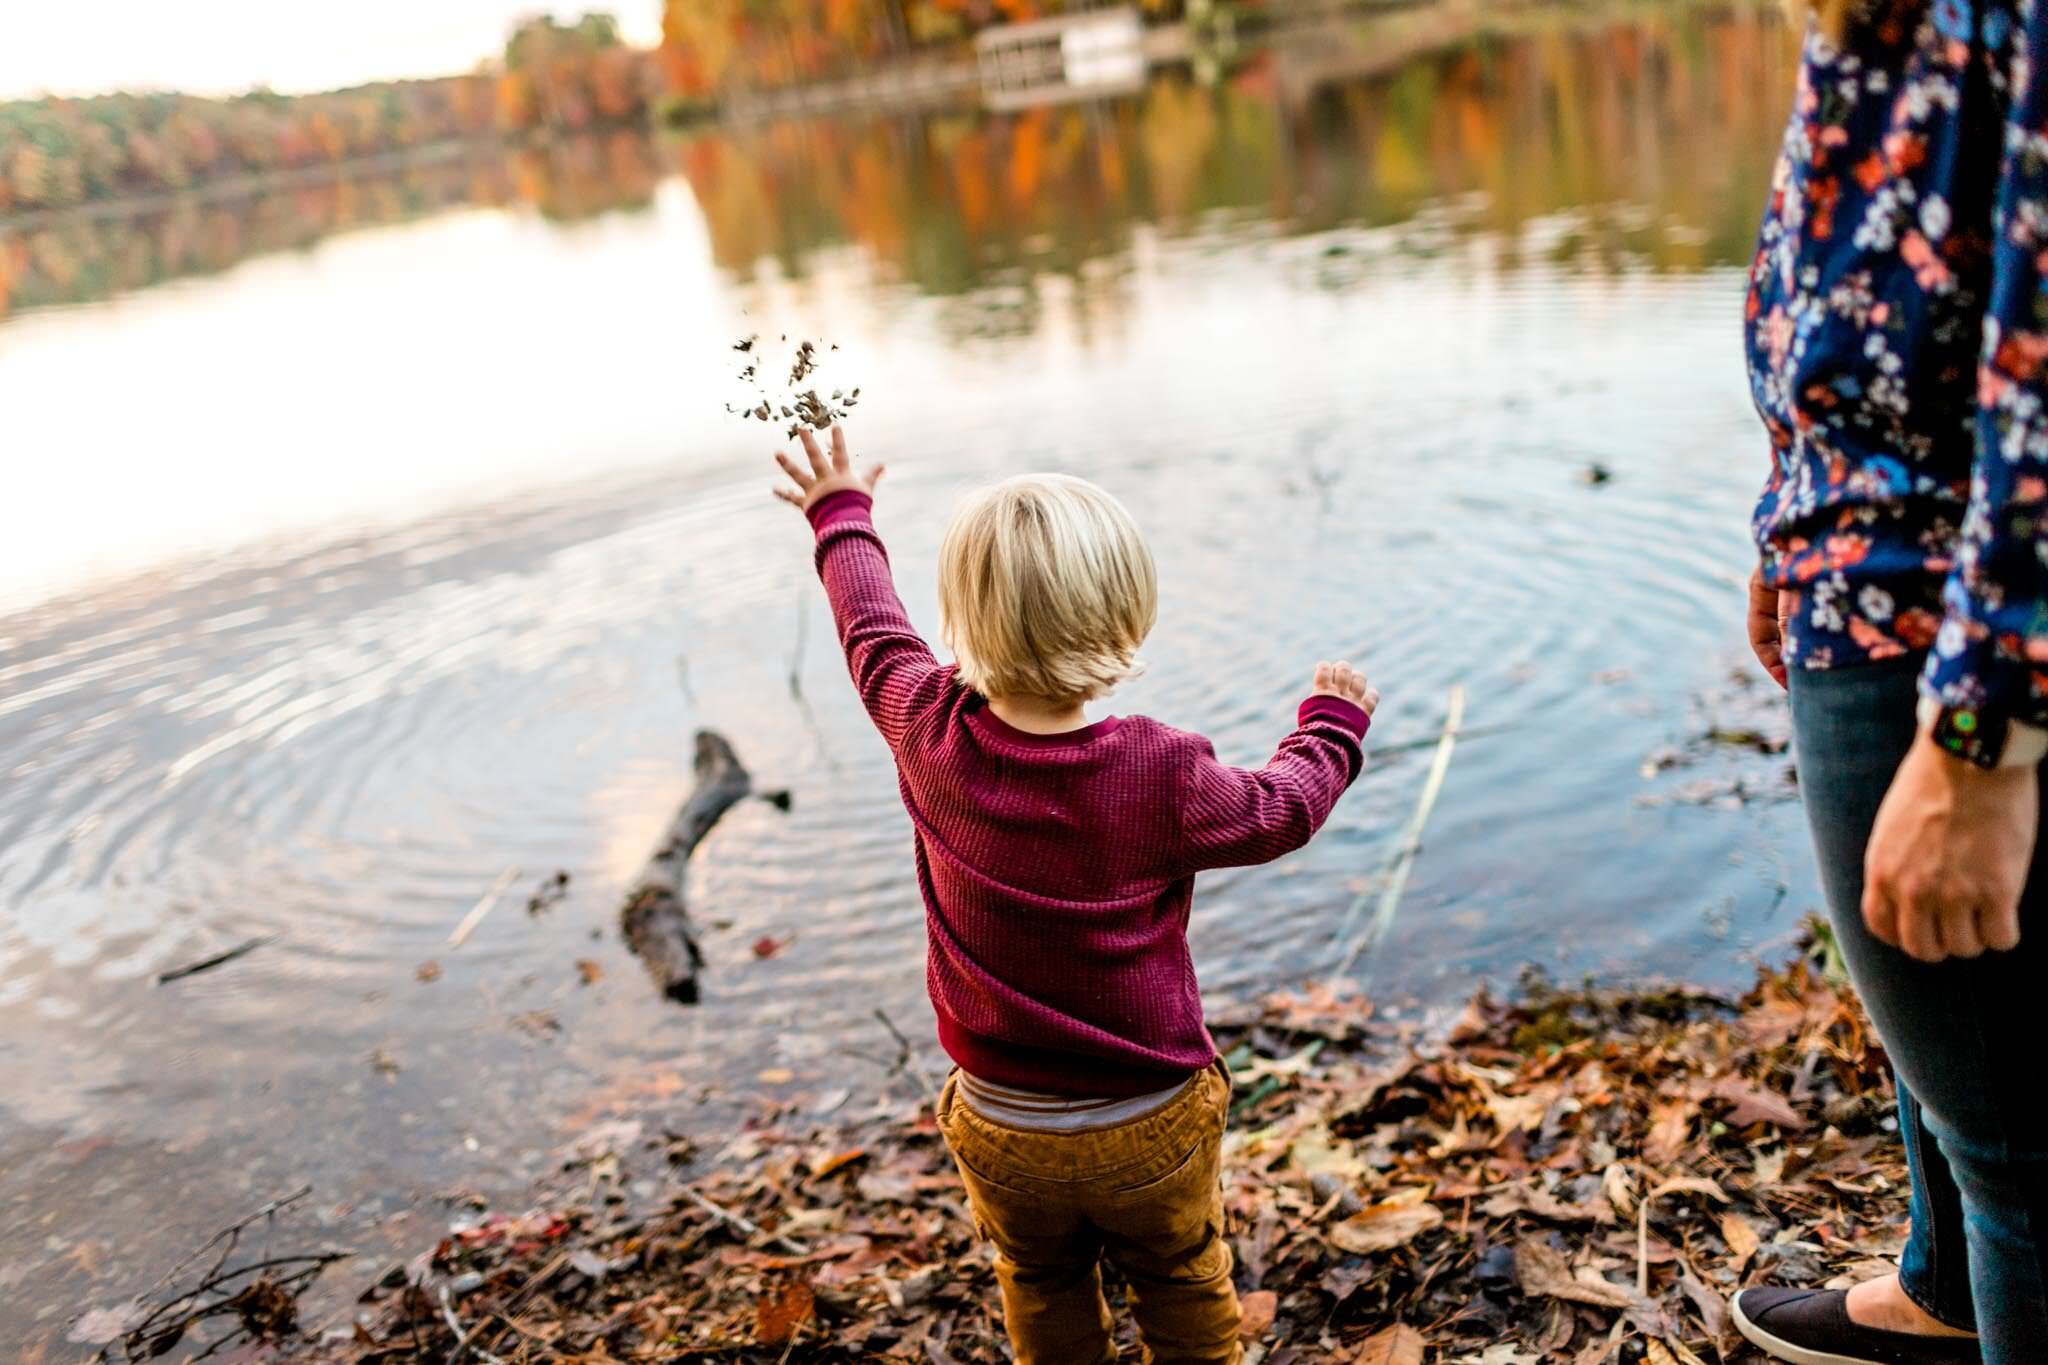 Raleigh Family Photographer at Umstead Park | By G. Lin Photography | Young boy in red shirt throwing rocks in lake